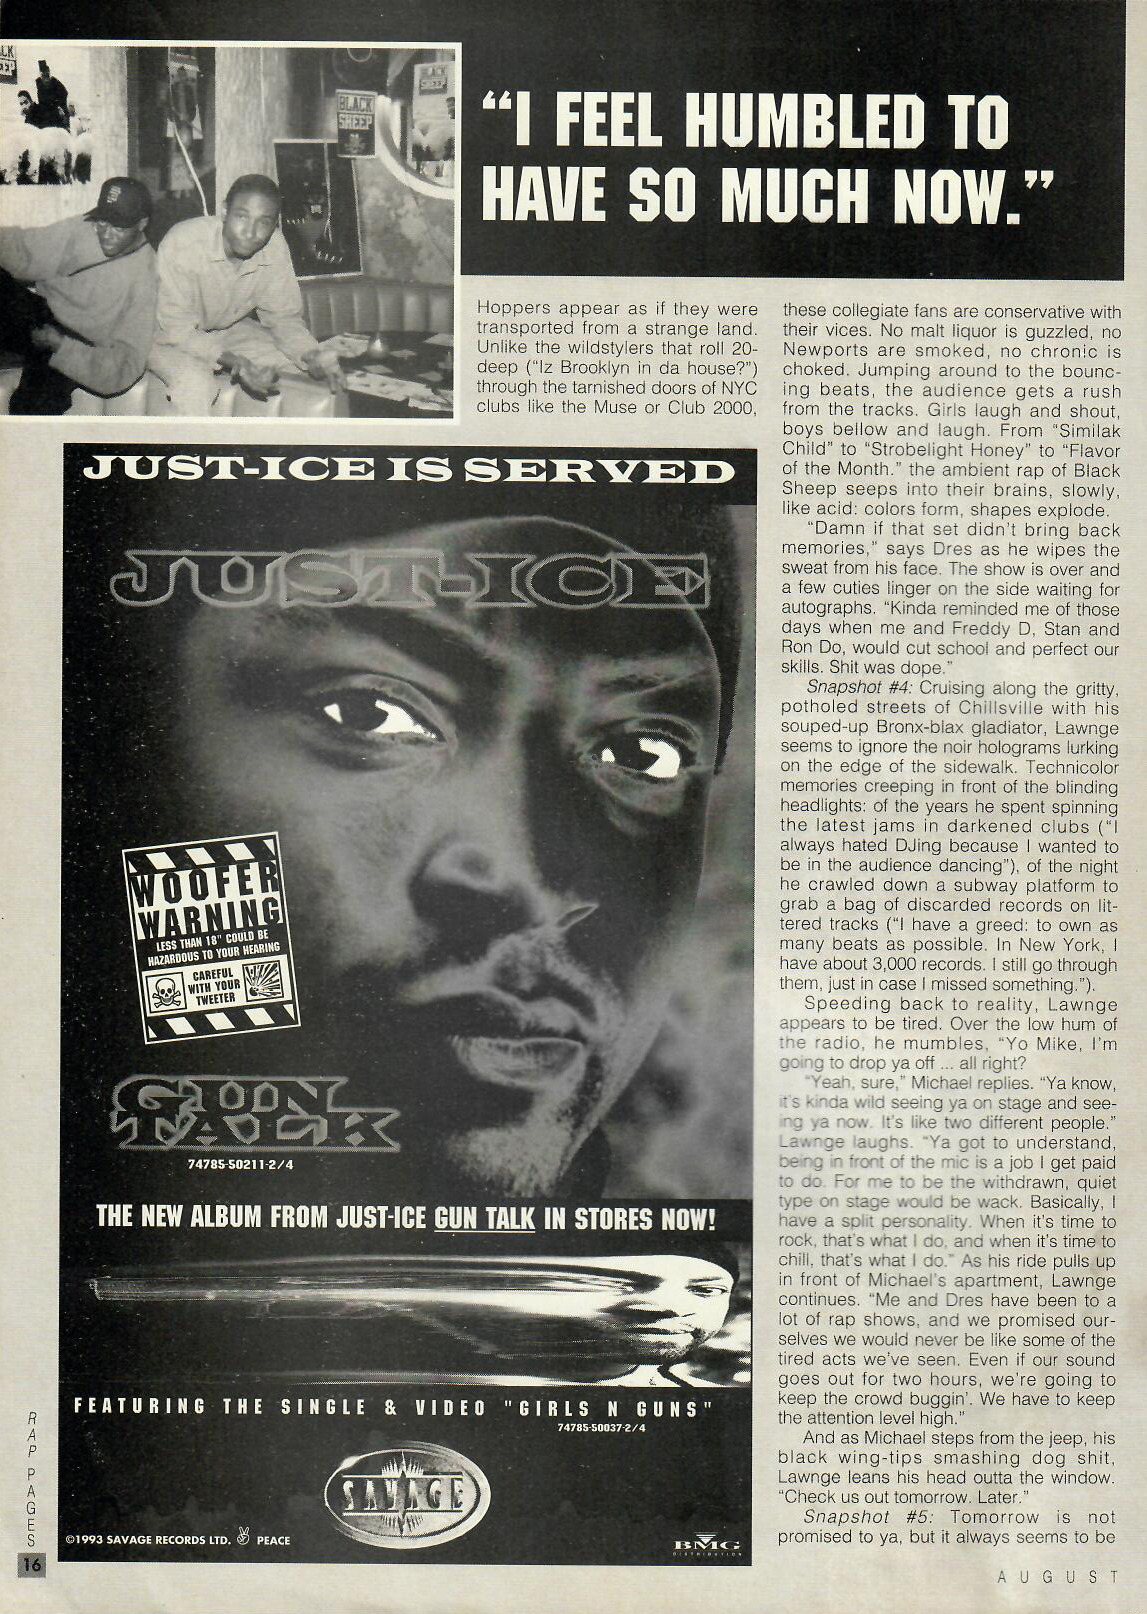 HipHop-TheGoldenEra: Lost In Chillsville - Black Sheep in Rap Pages - 1993